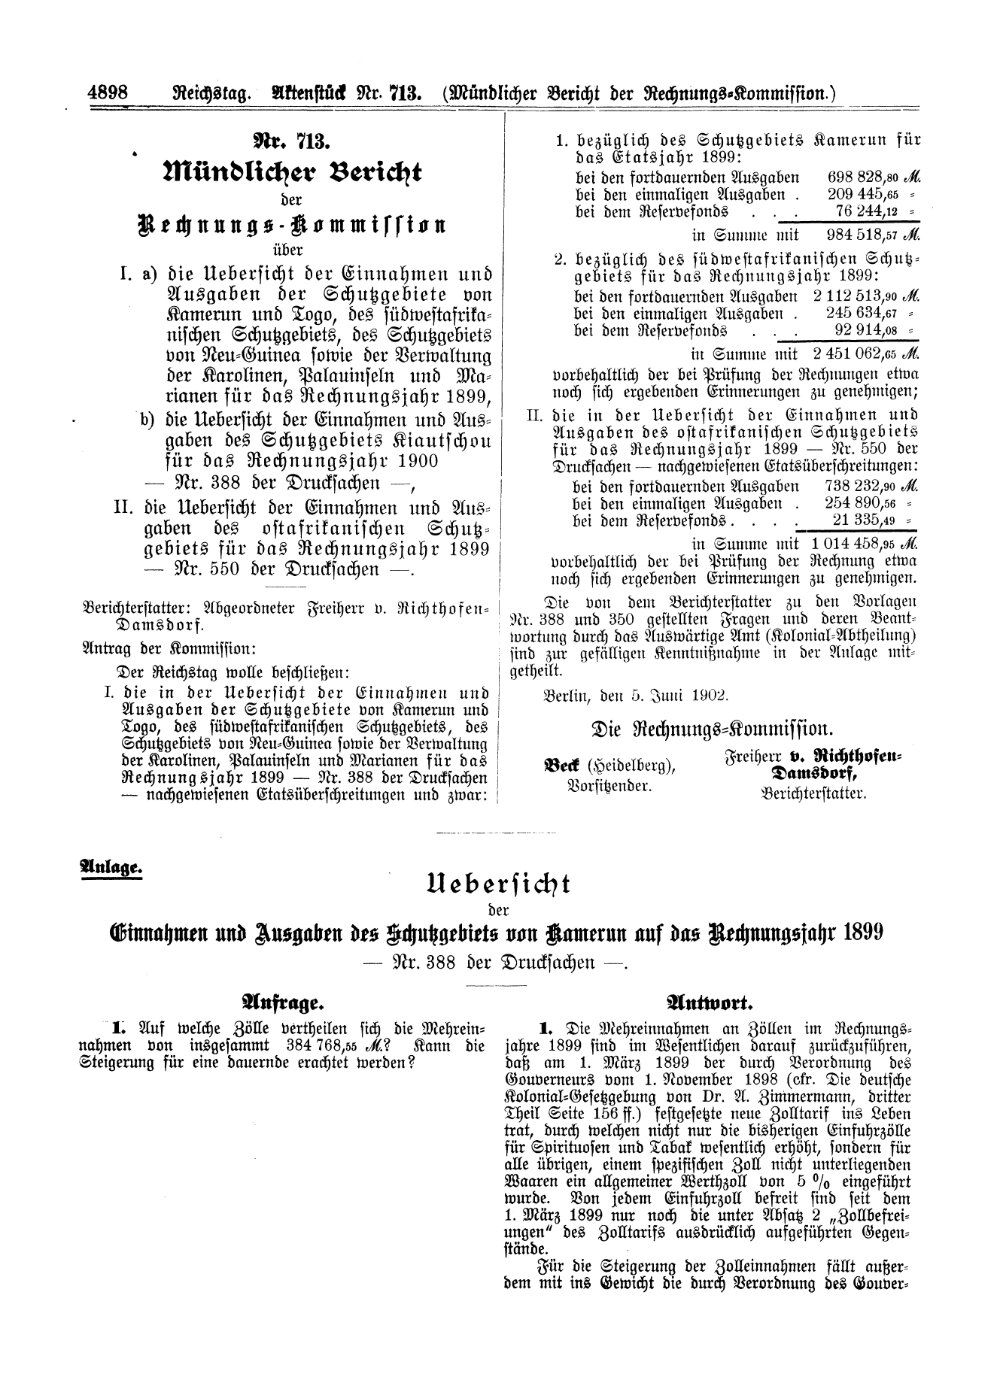 Scan of page 4898